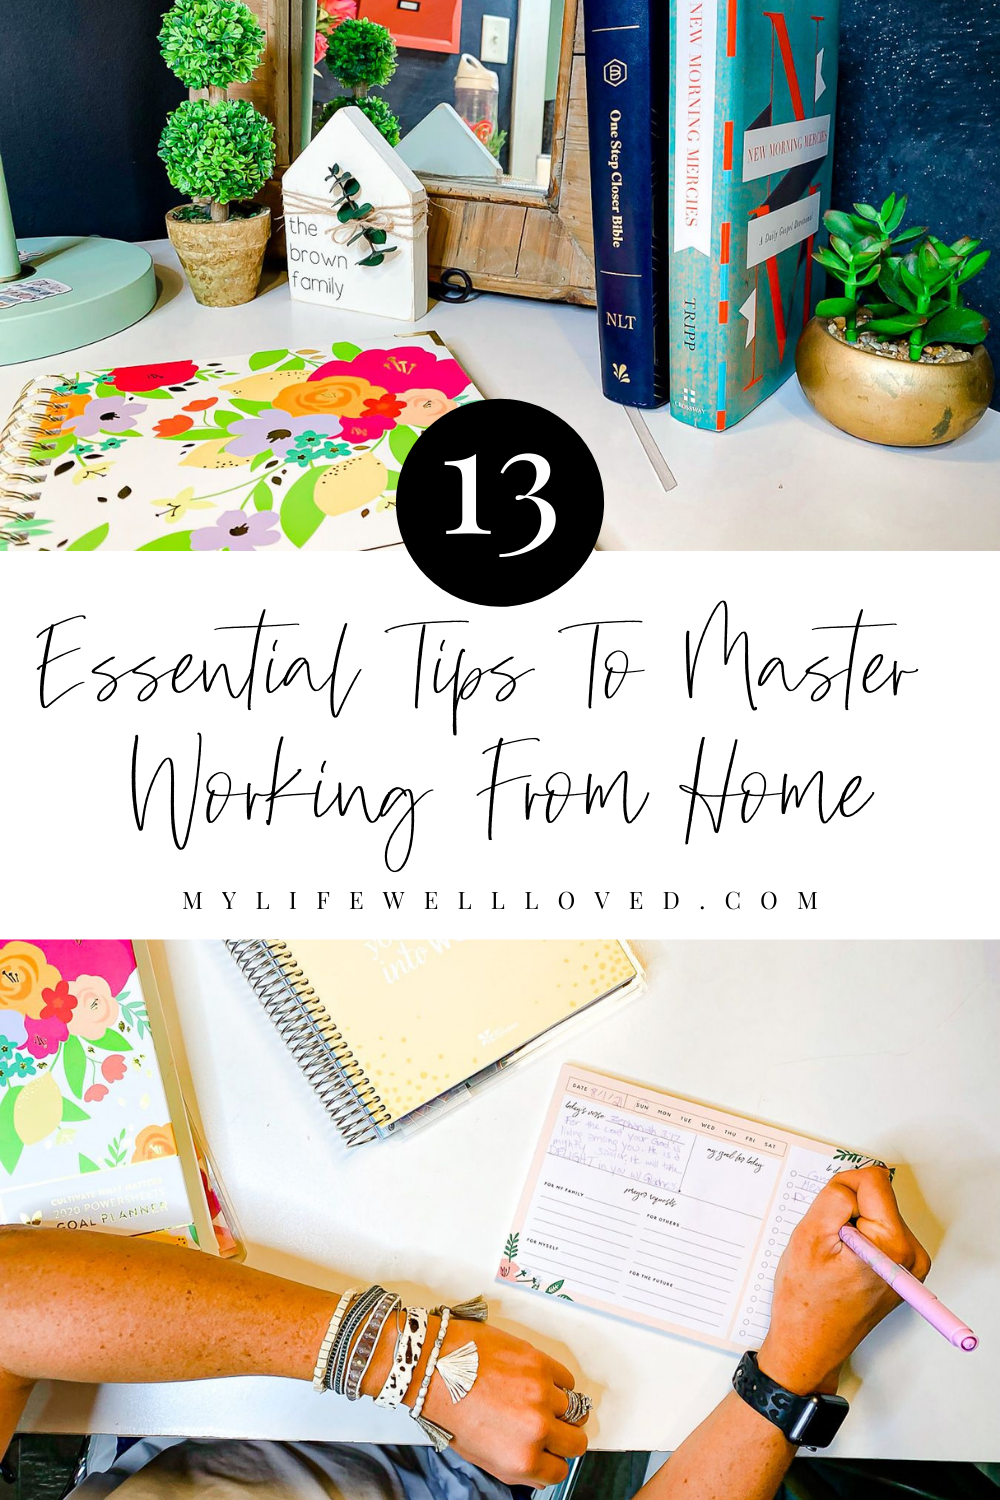 Alabama mom + lifestyle blogger, My Life Well Loved, shares her tips for working from home as a mom. Click here to read!